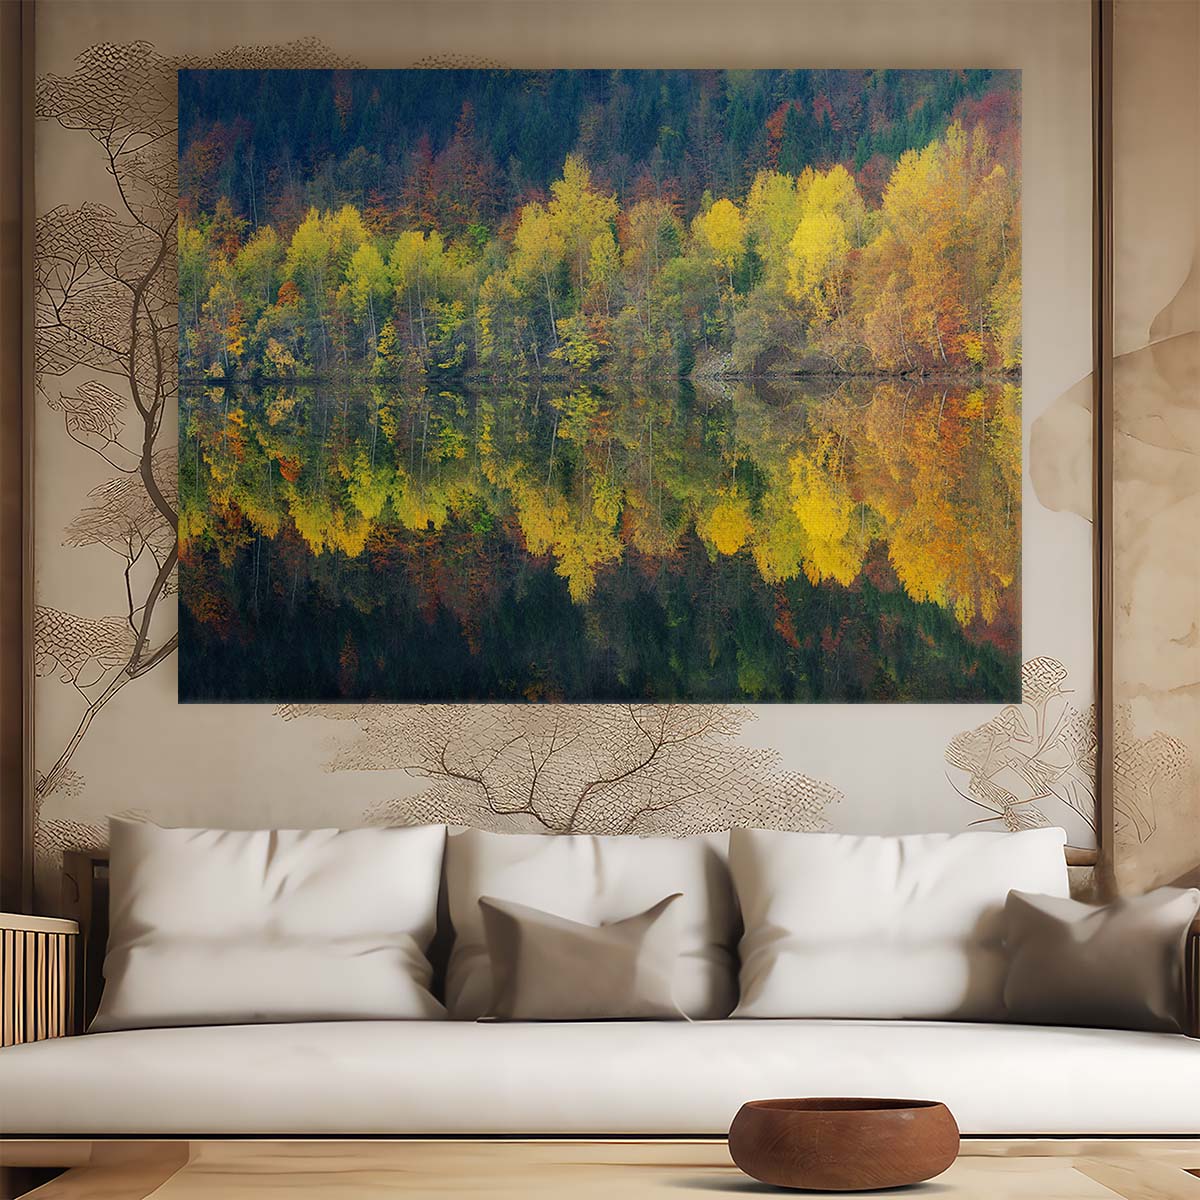 Serene Autumn Lake Reflection Panoramic Wall Art by Luxuriance Designs. Made in USA.